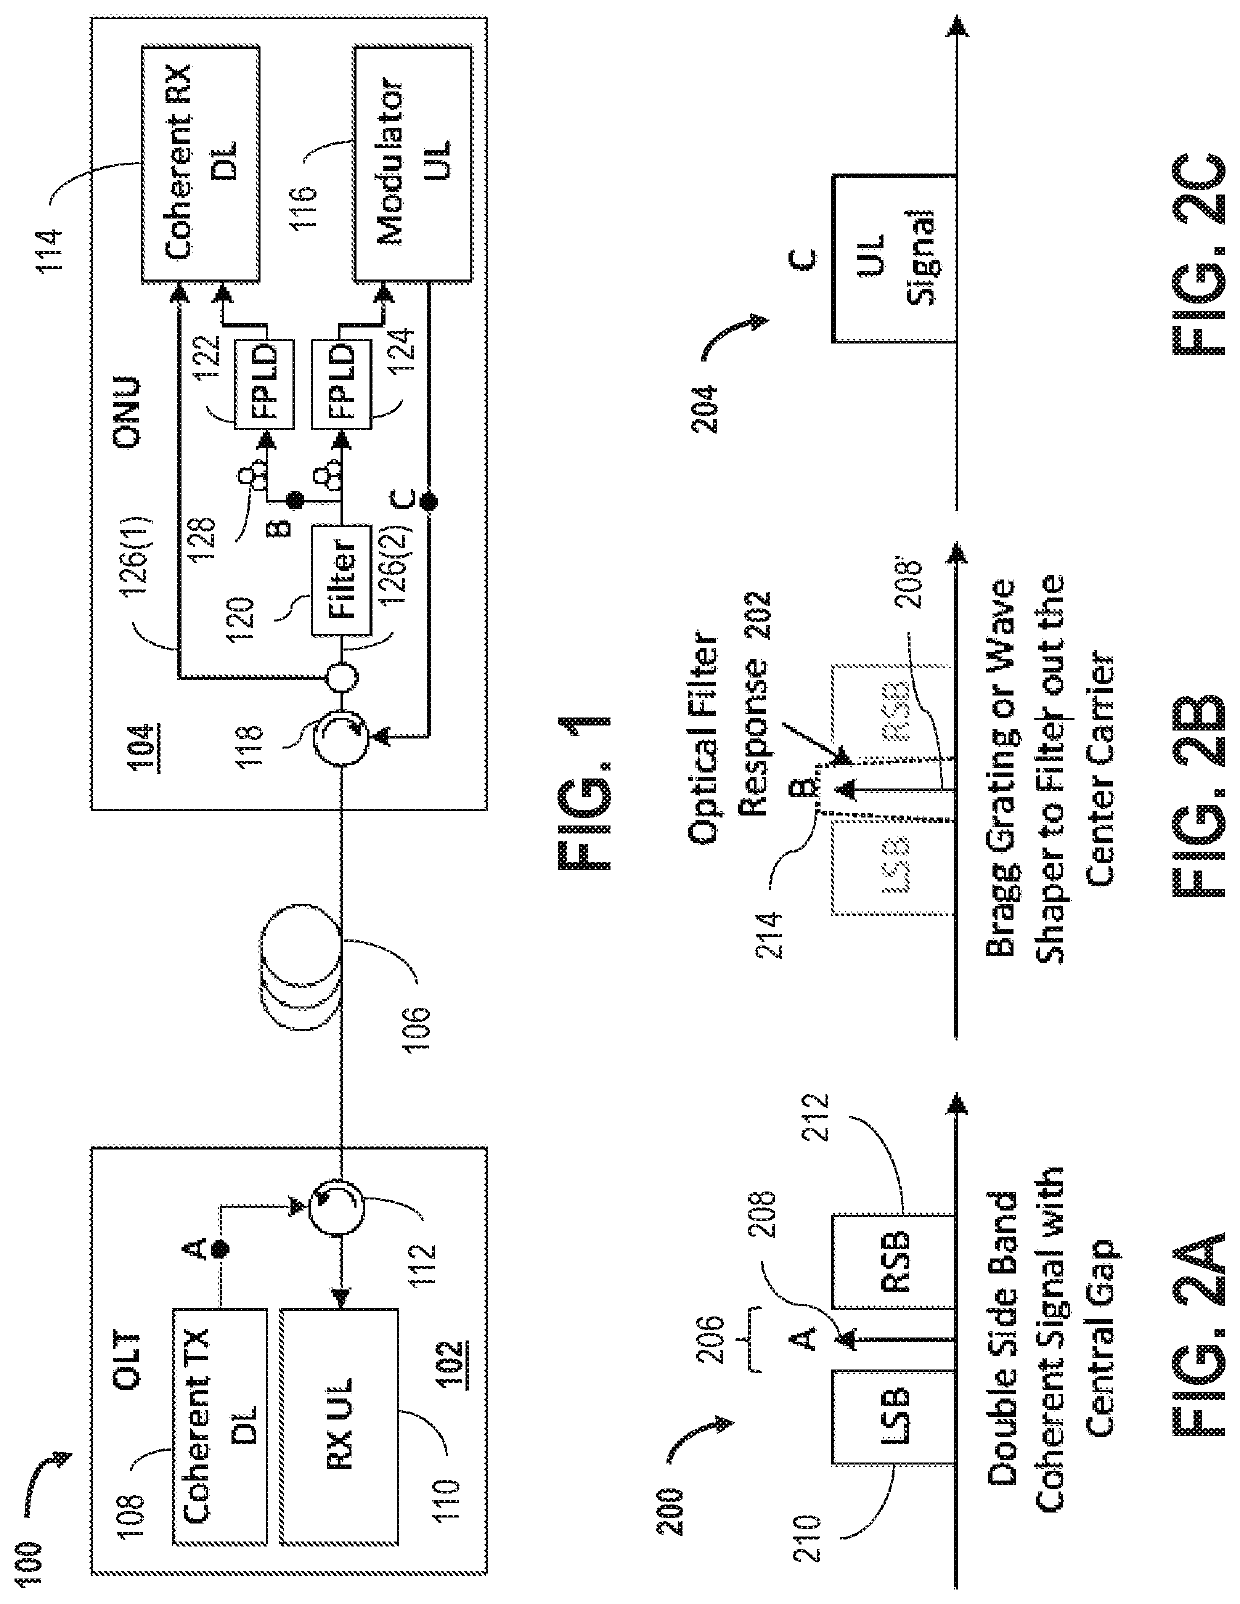 Systems and methods for dual-band modulation and injection-locking for coherent PON